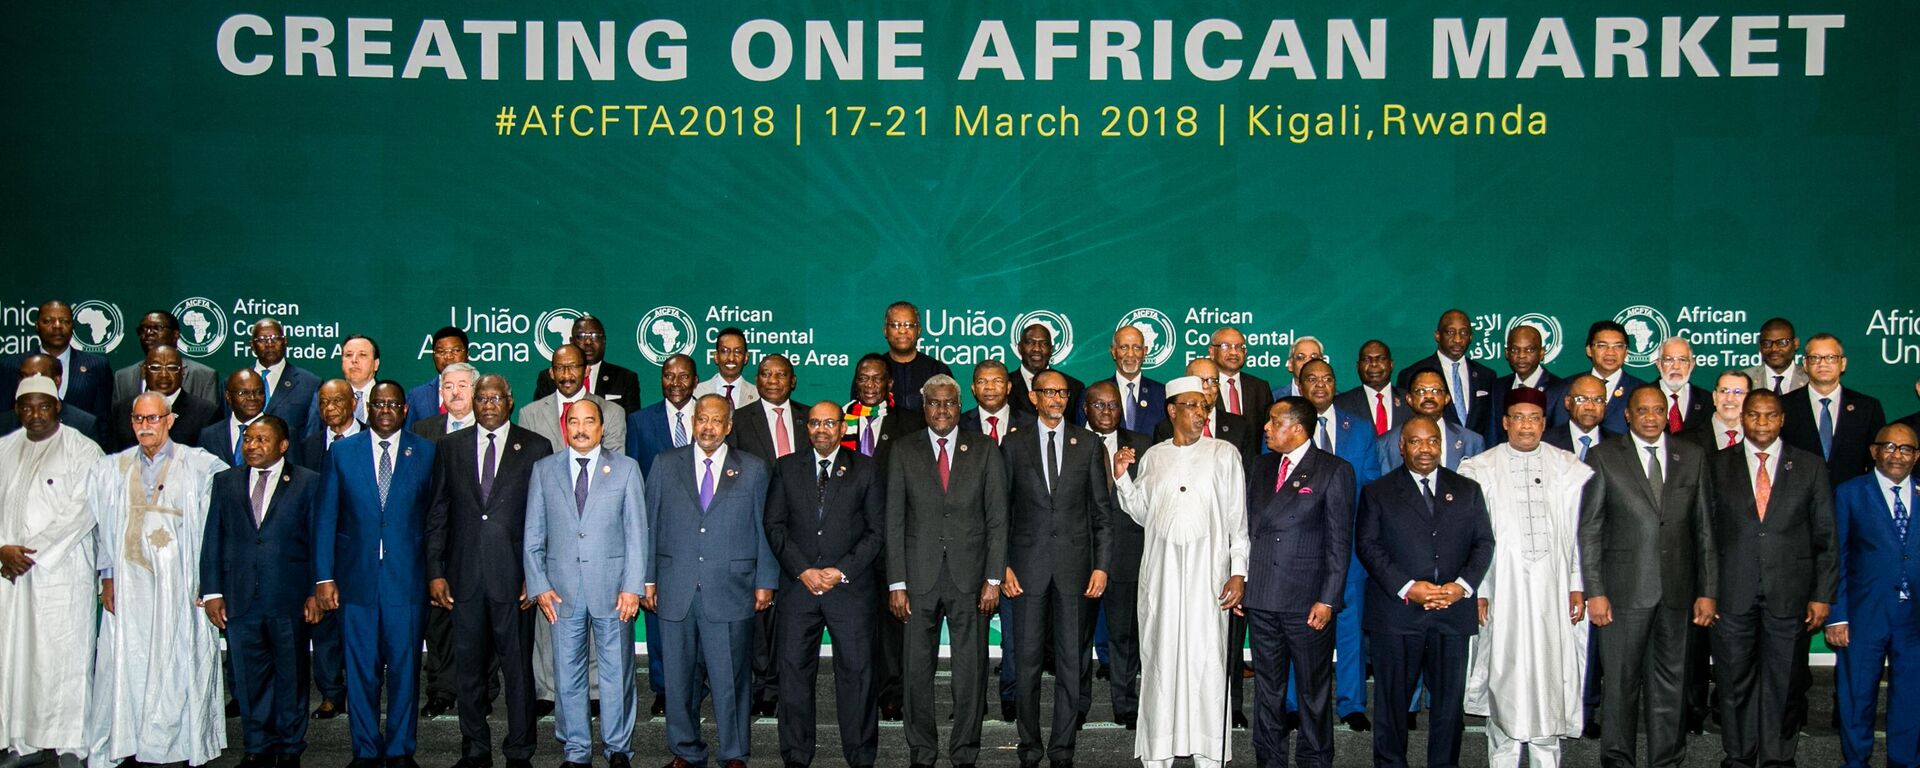 African heads of states and governments pose during the African Union (AU) Summit for the agreement to establish the African Continental Free Trade Area in Kigali, Rwanda, on March 21, 2018. - Sputnik Africa, 1920, 17.02.2023